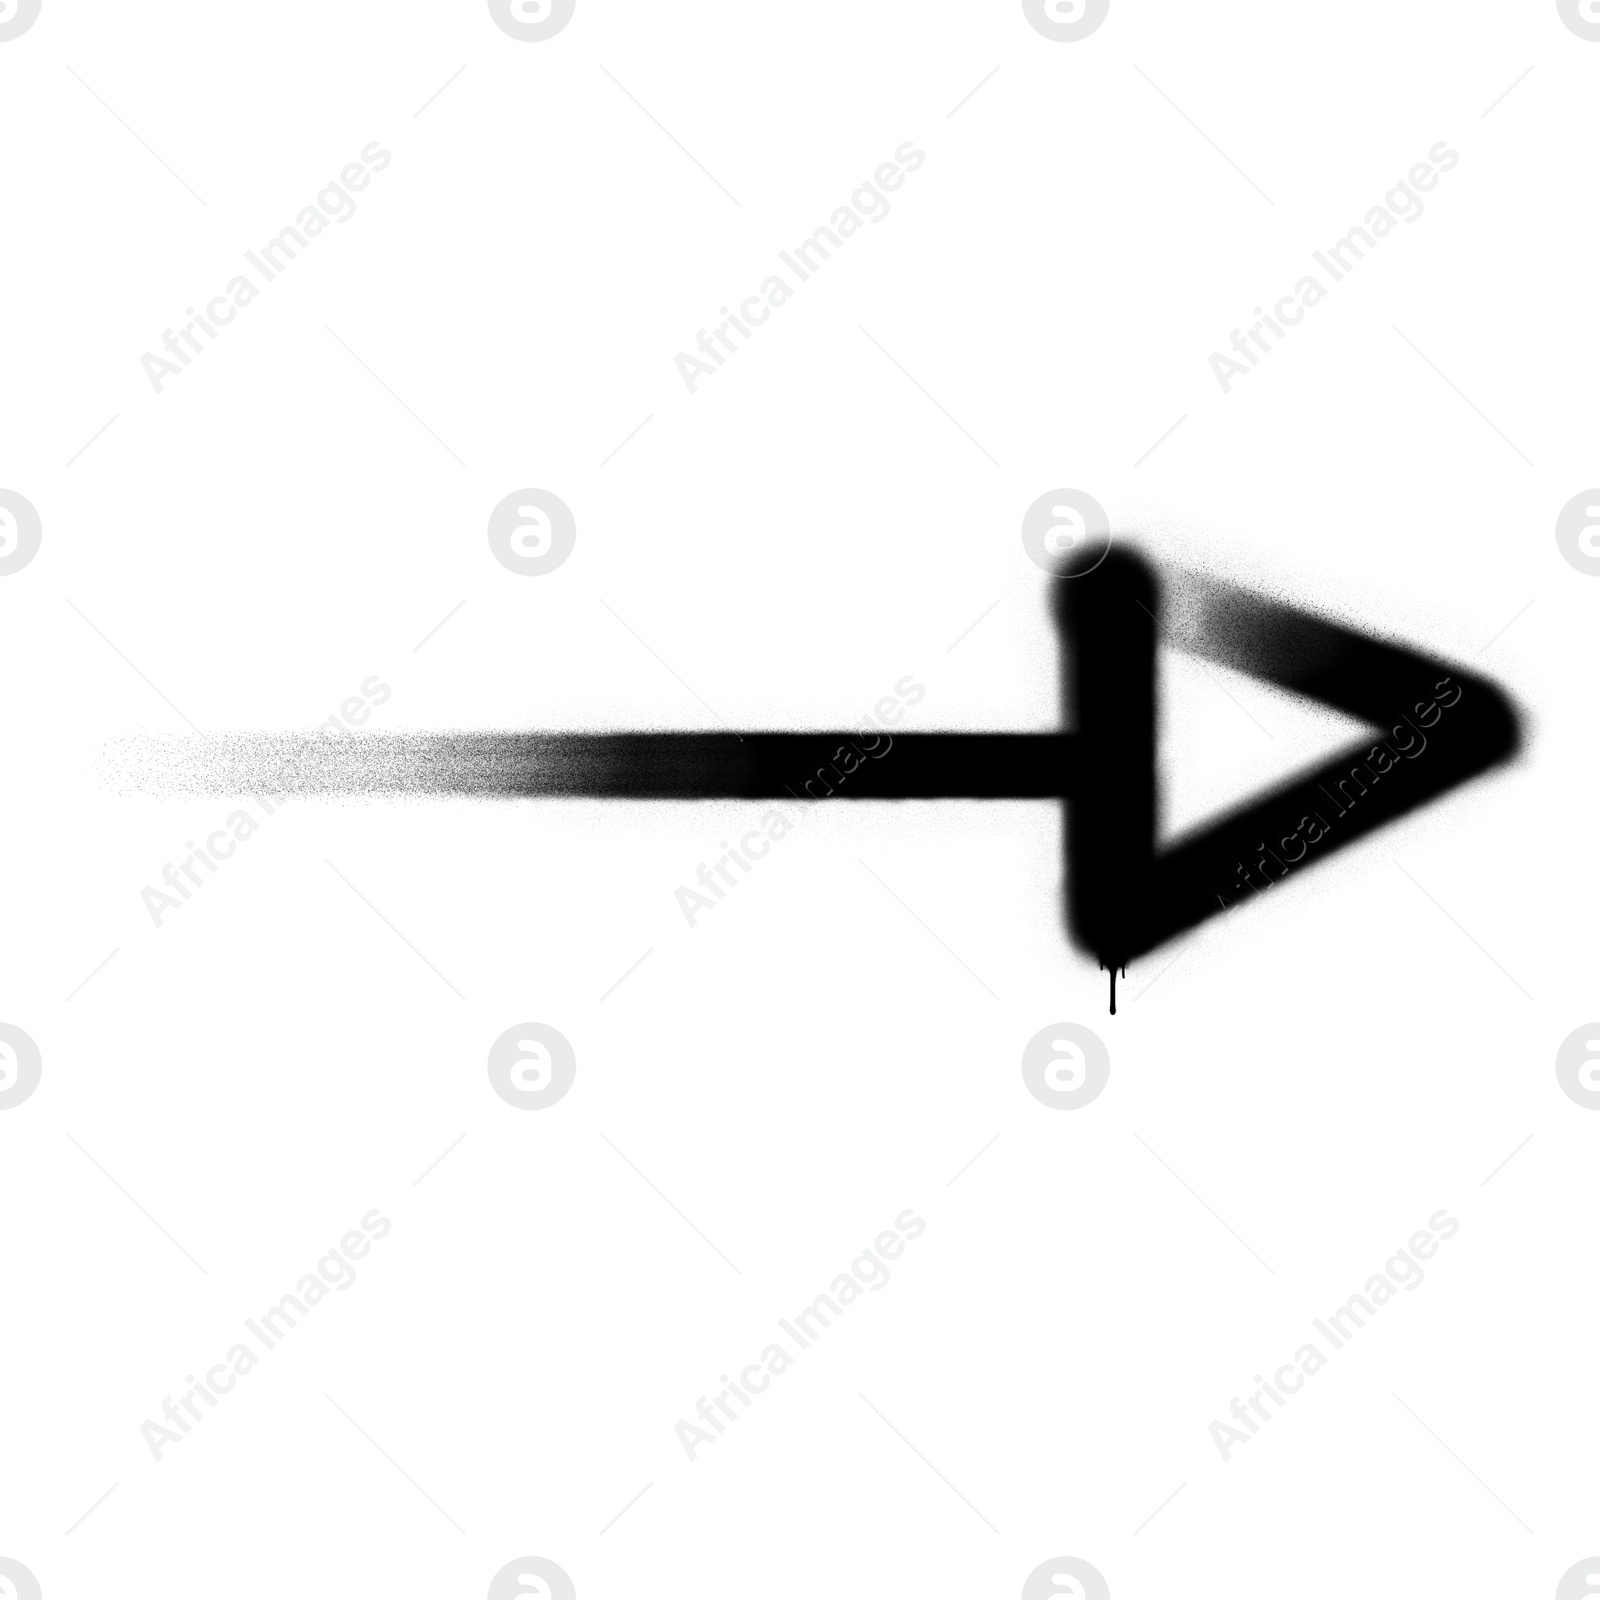 Illustration of Arrow drawn by black spray paint on white background